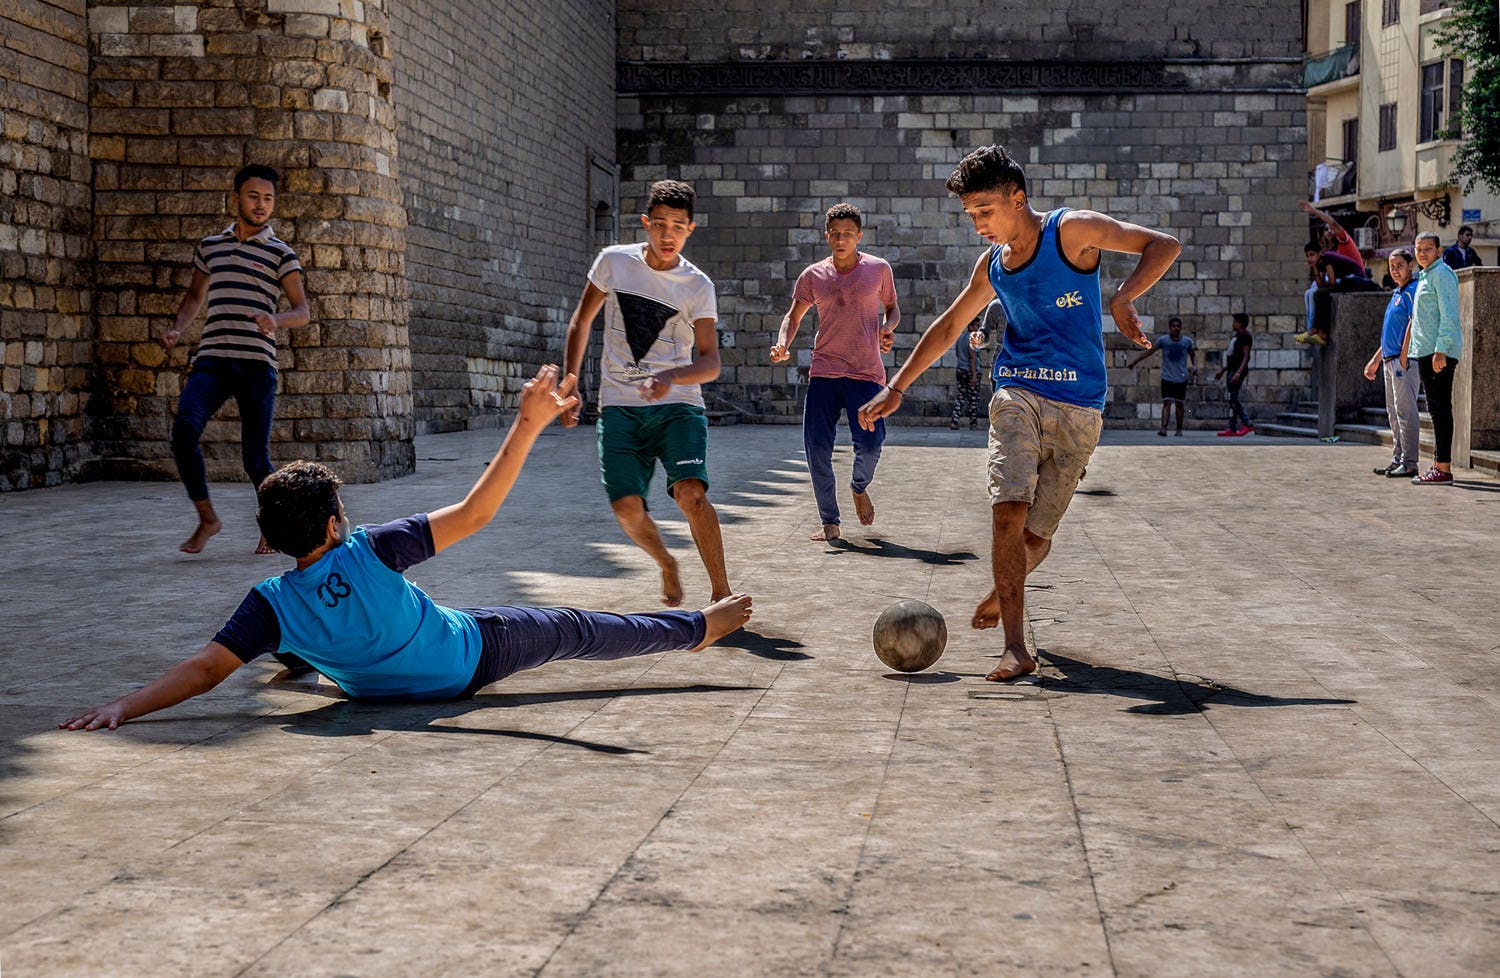 Football, a favorite activity among young people